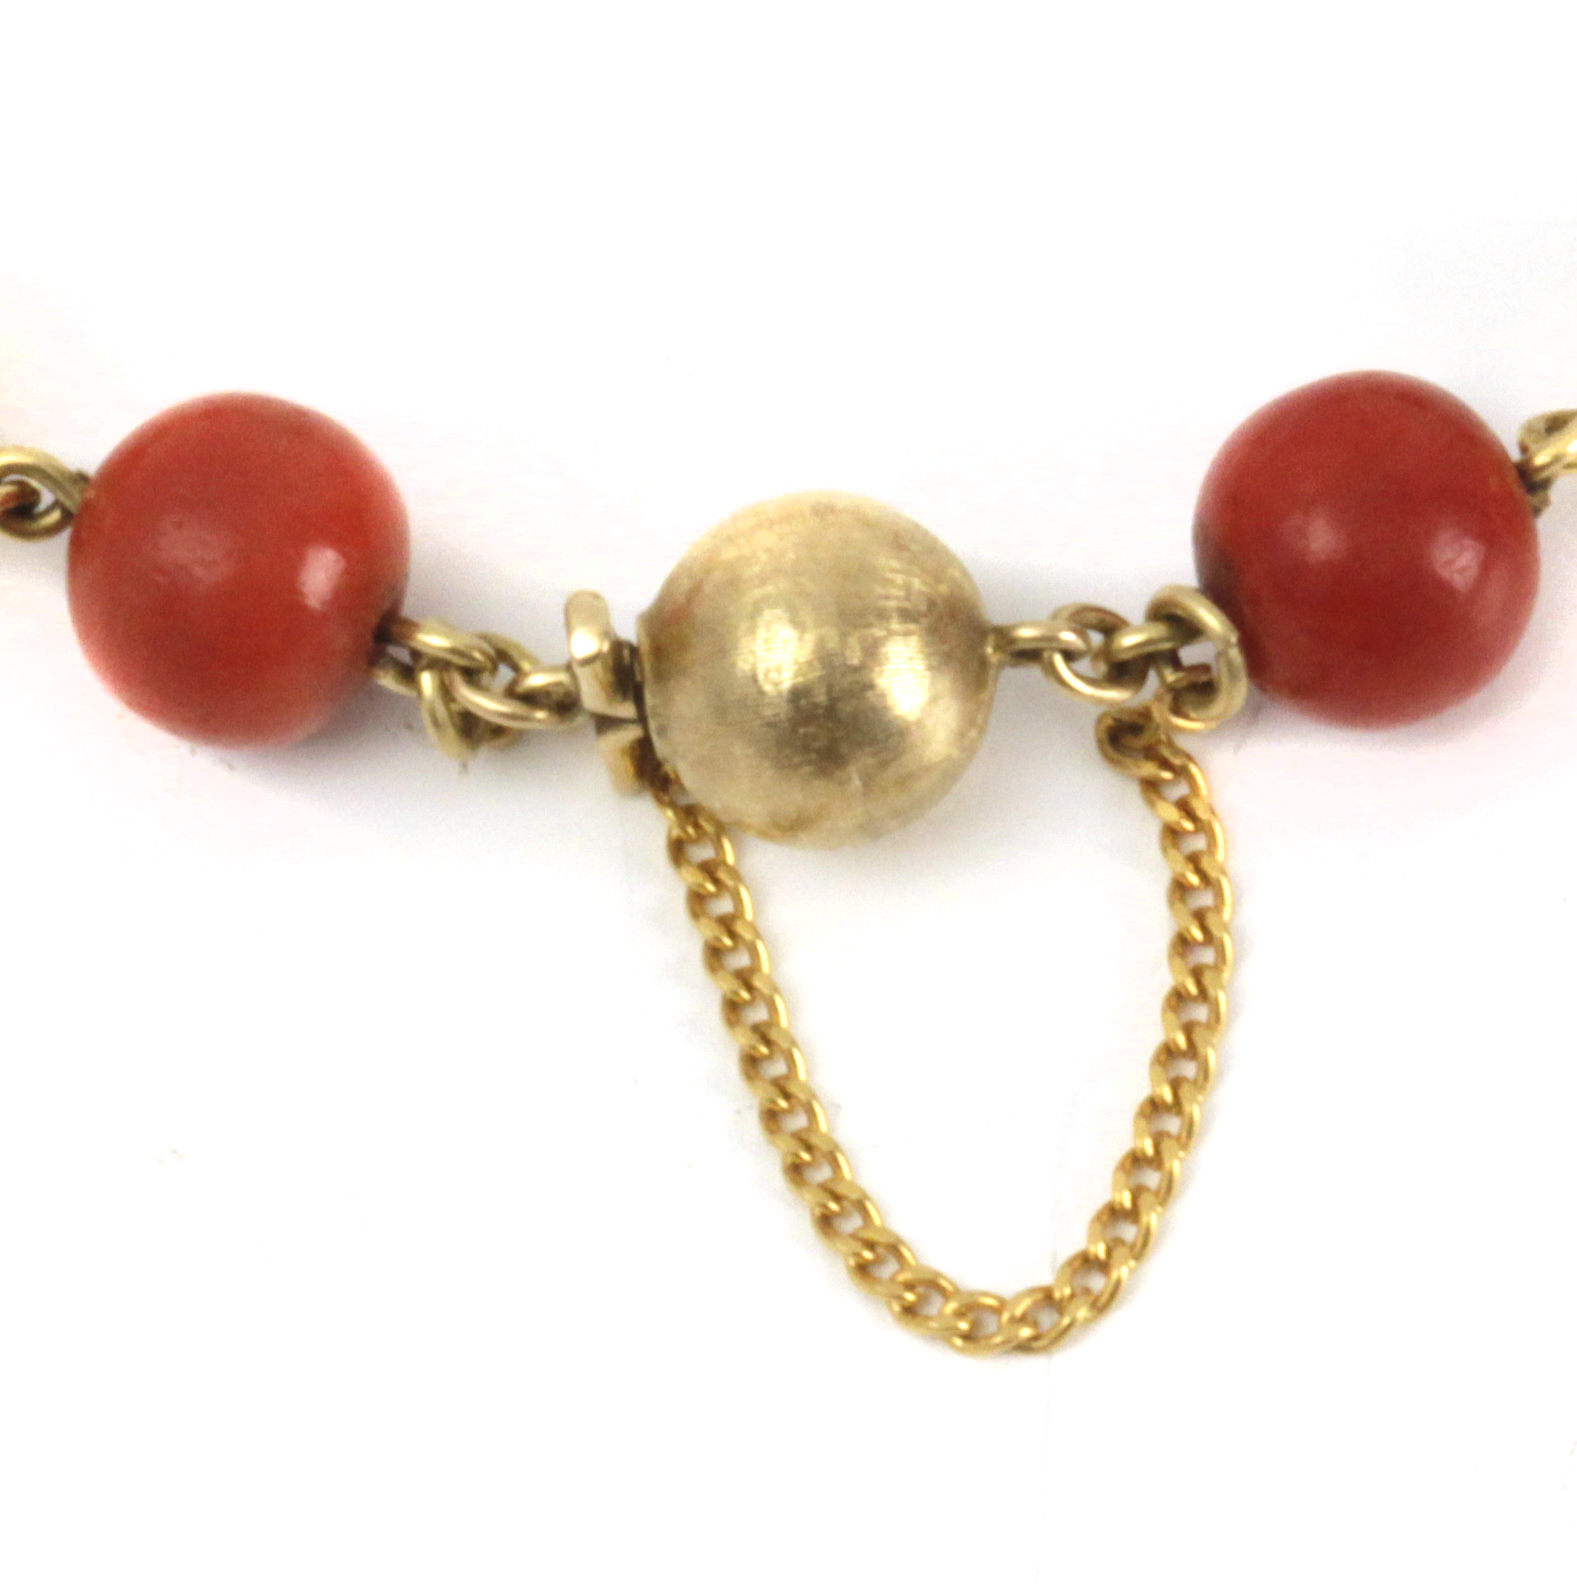 A 20th century 18k. yellow gold and coral beads bracelet - Image 2 of 2